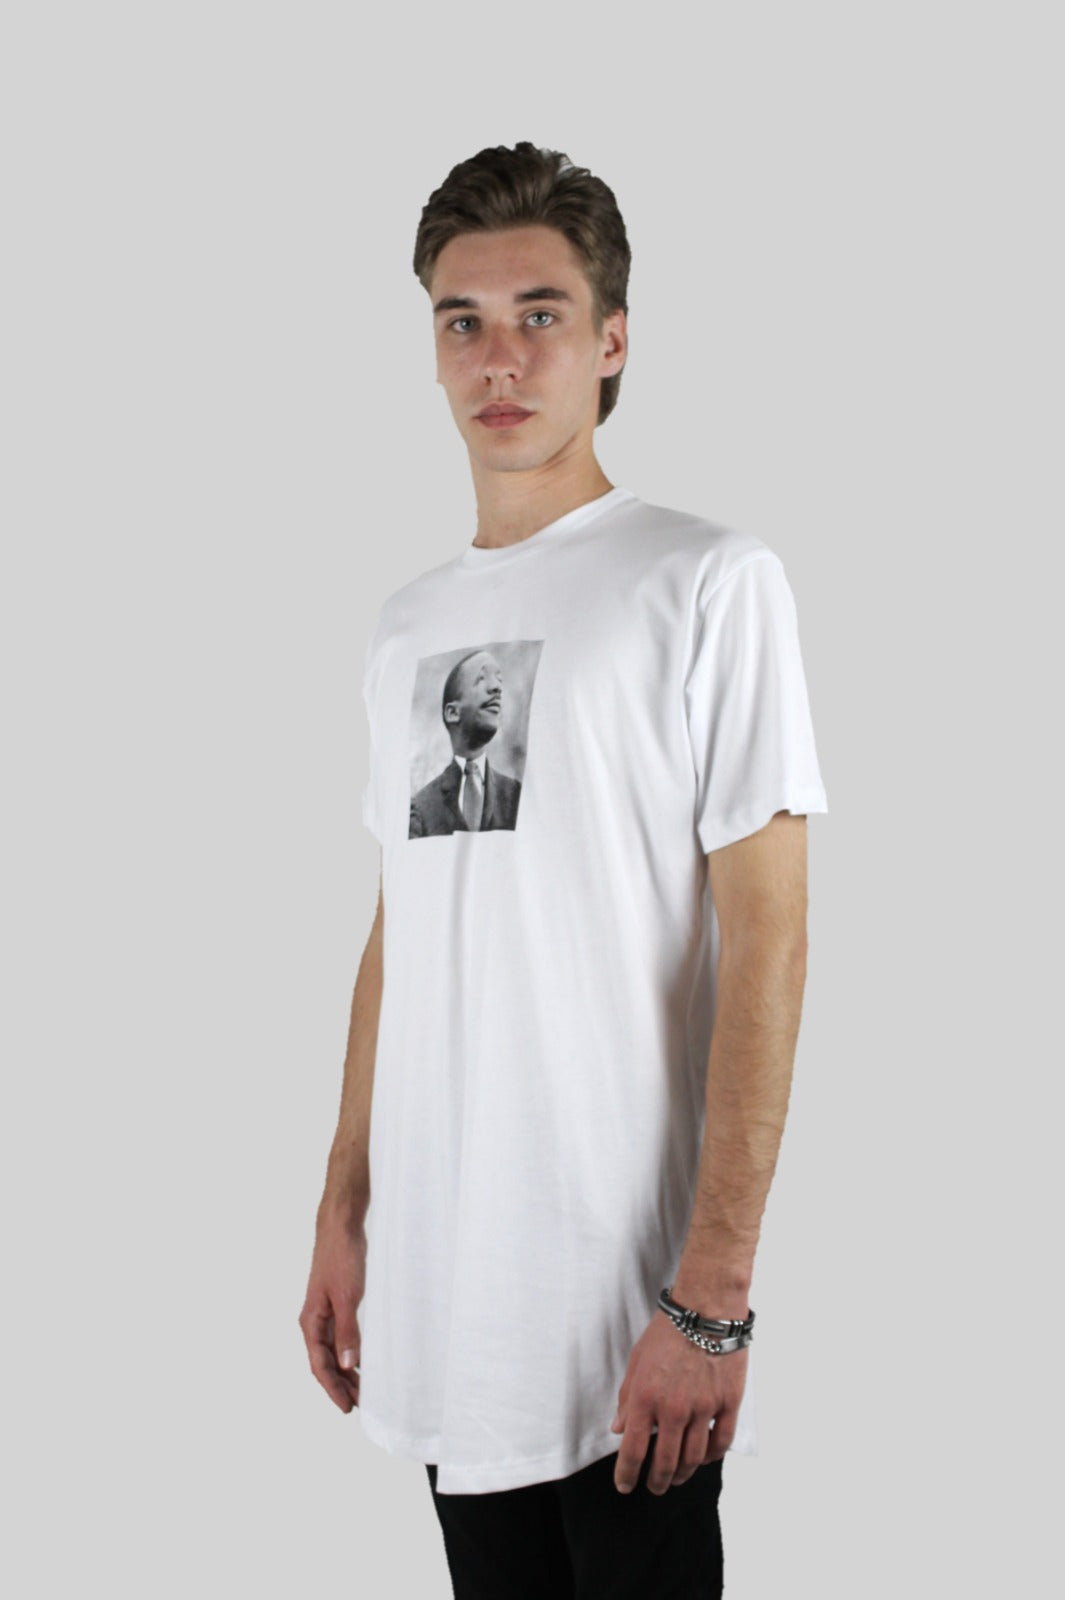 Martin Luther King T-Shirt